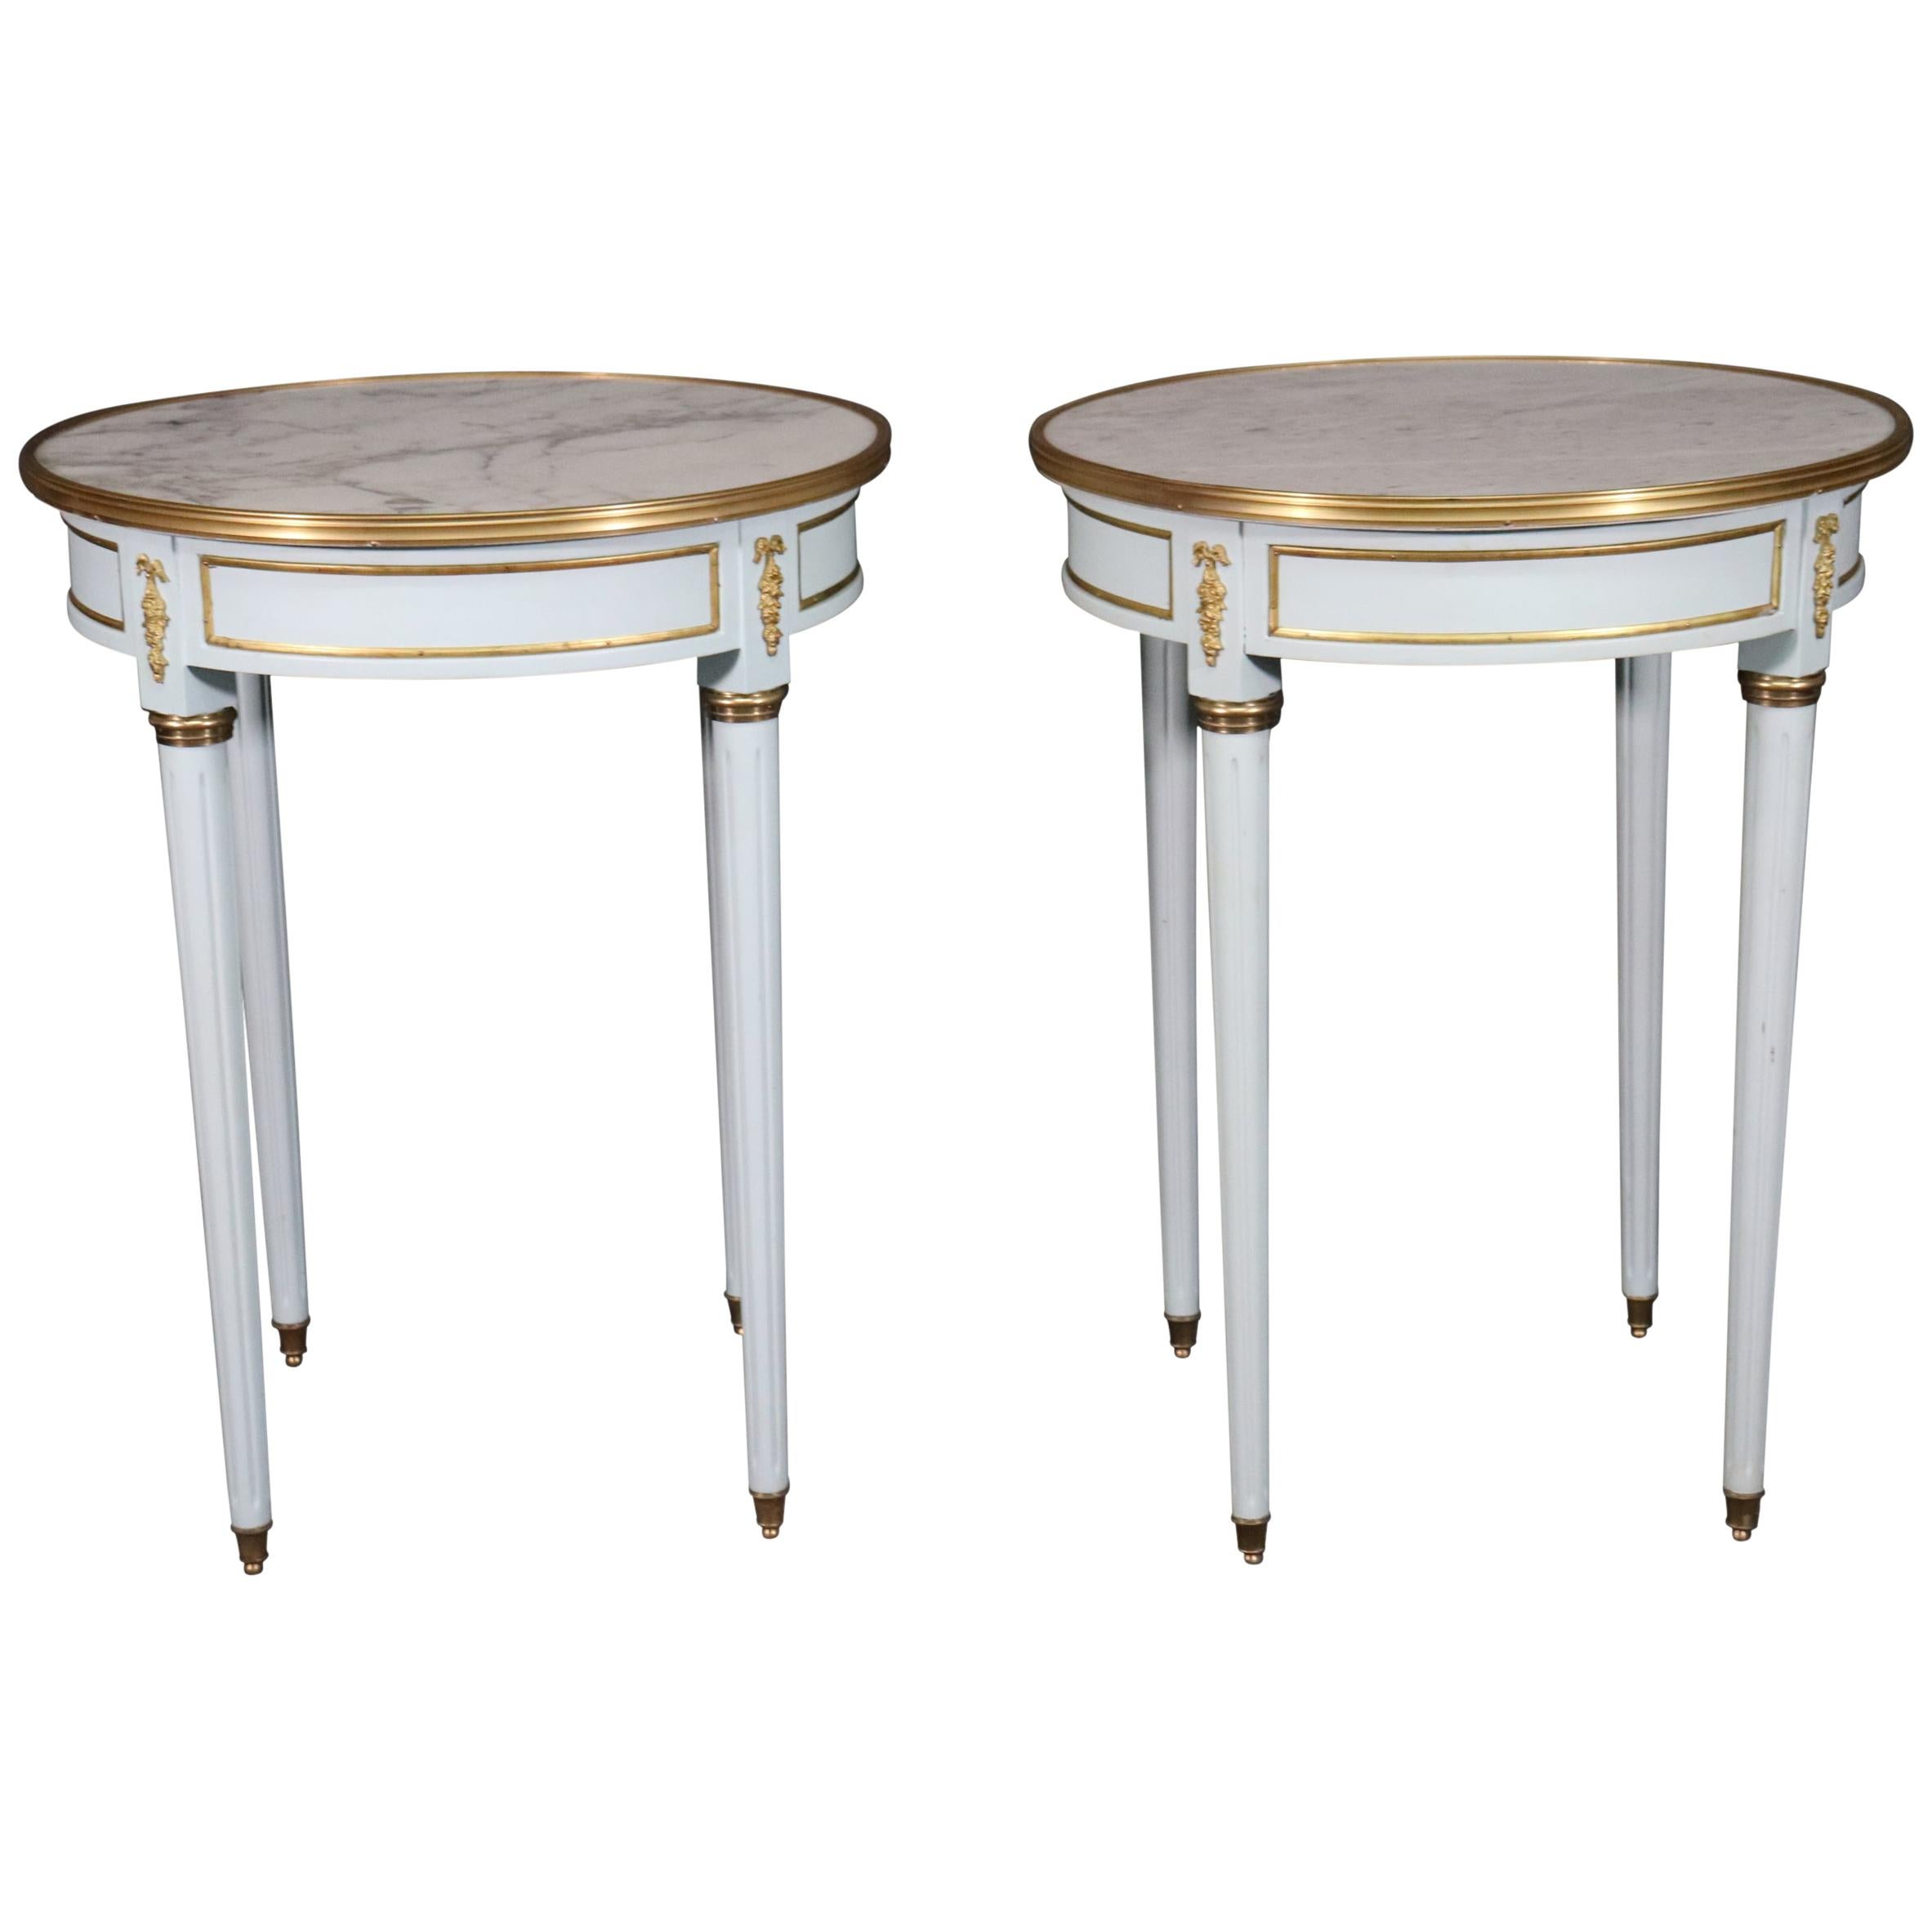 Pair of French Louis XVI Blue Lacquered White Marble-Top Guéridon End Tables